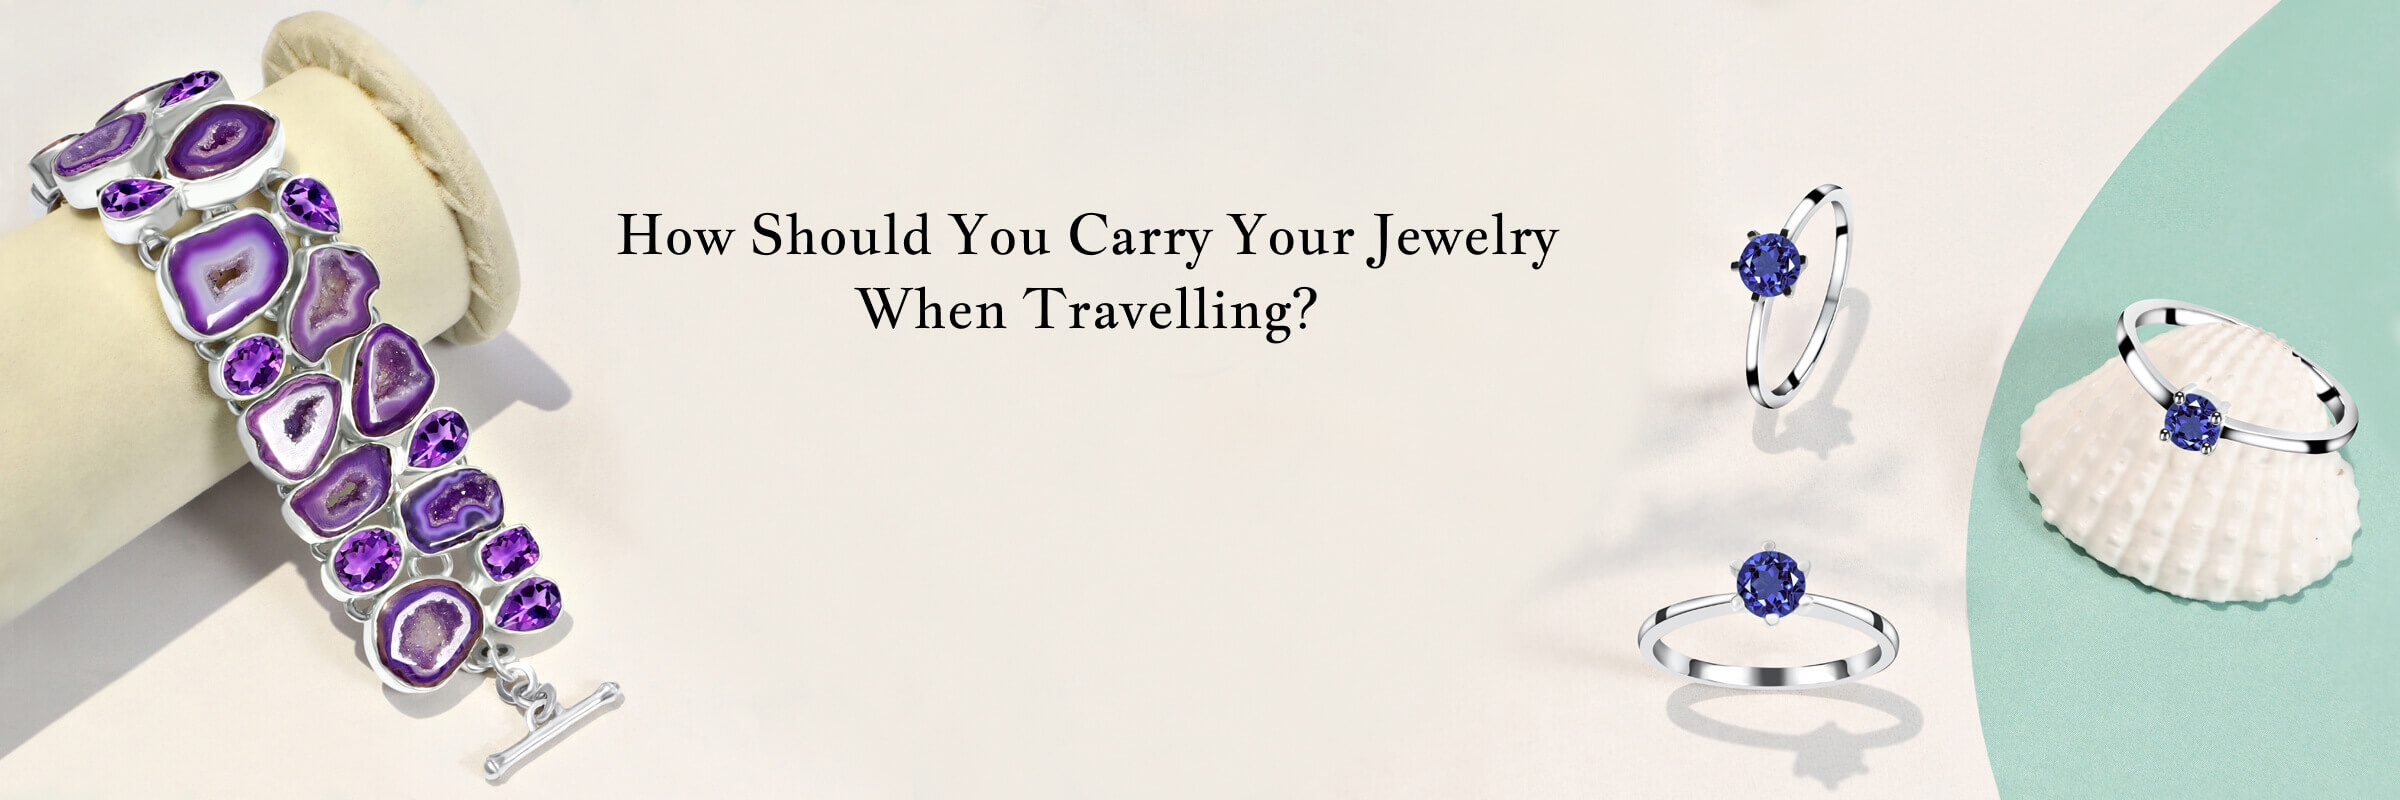 How Should You Carry Your Jewelry When Travelling?